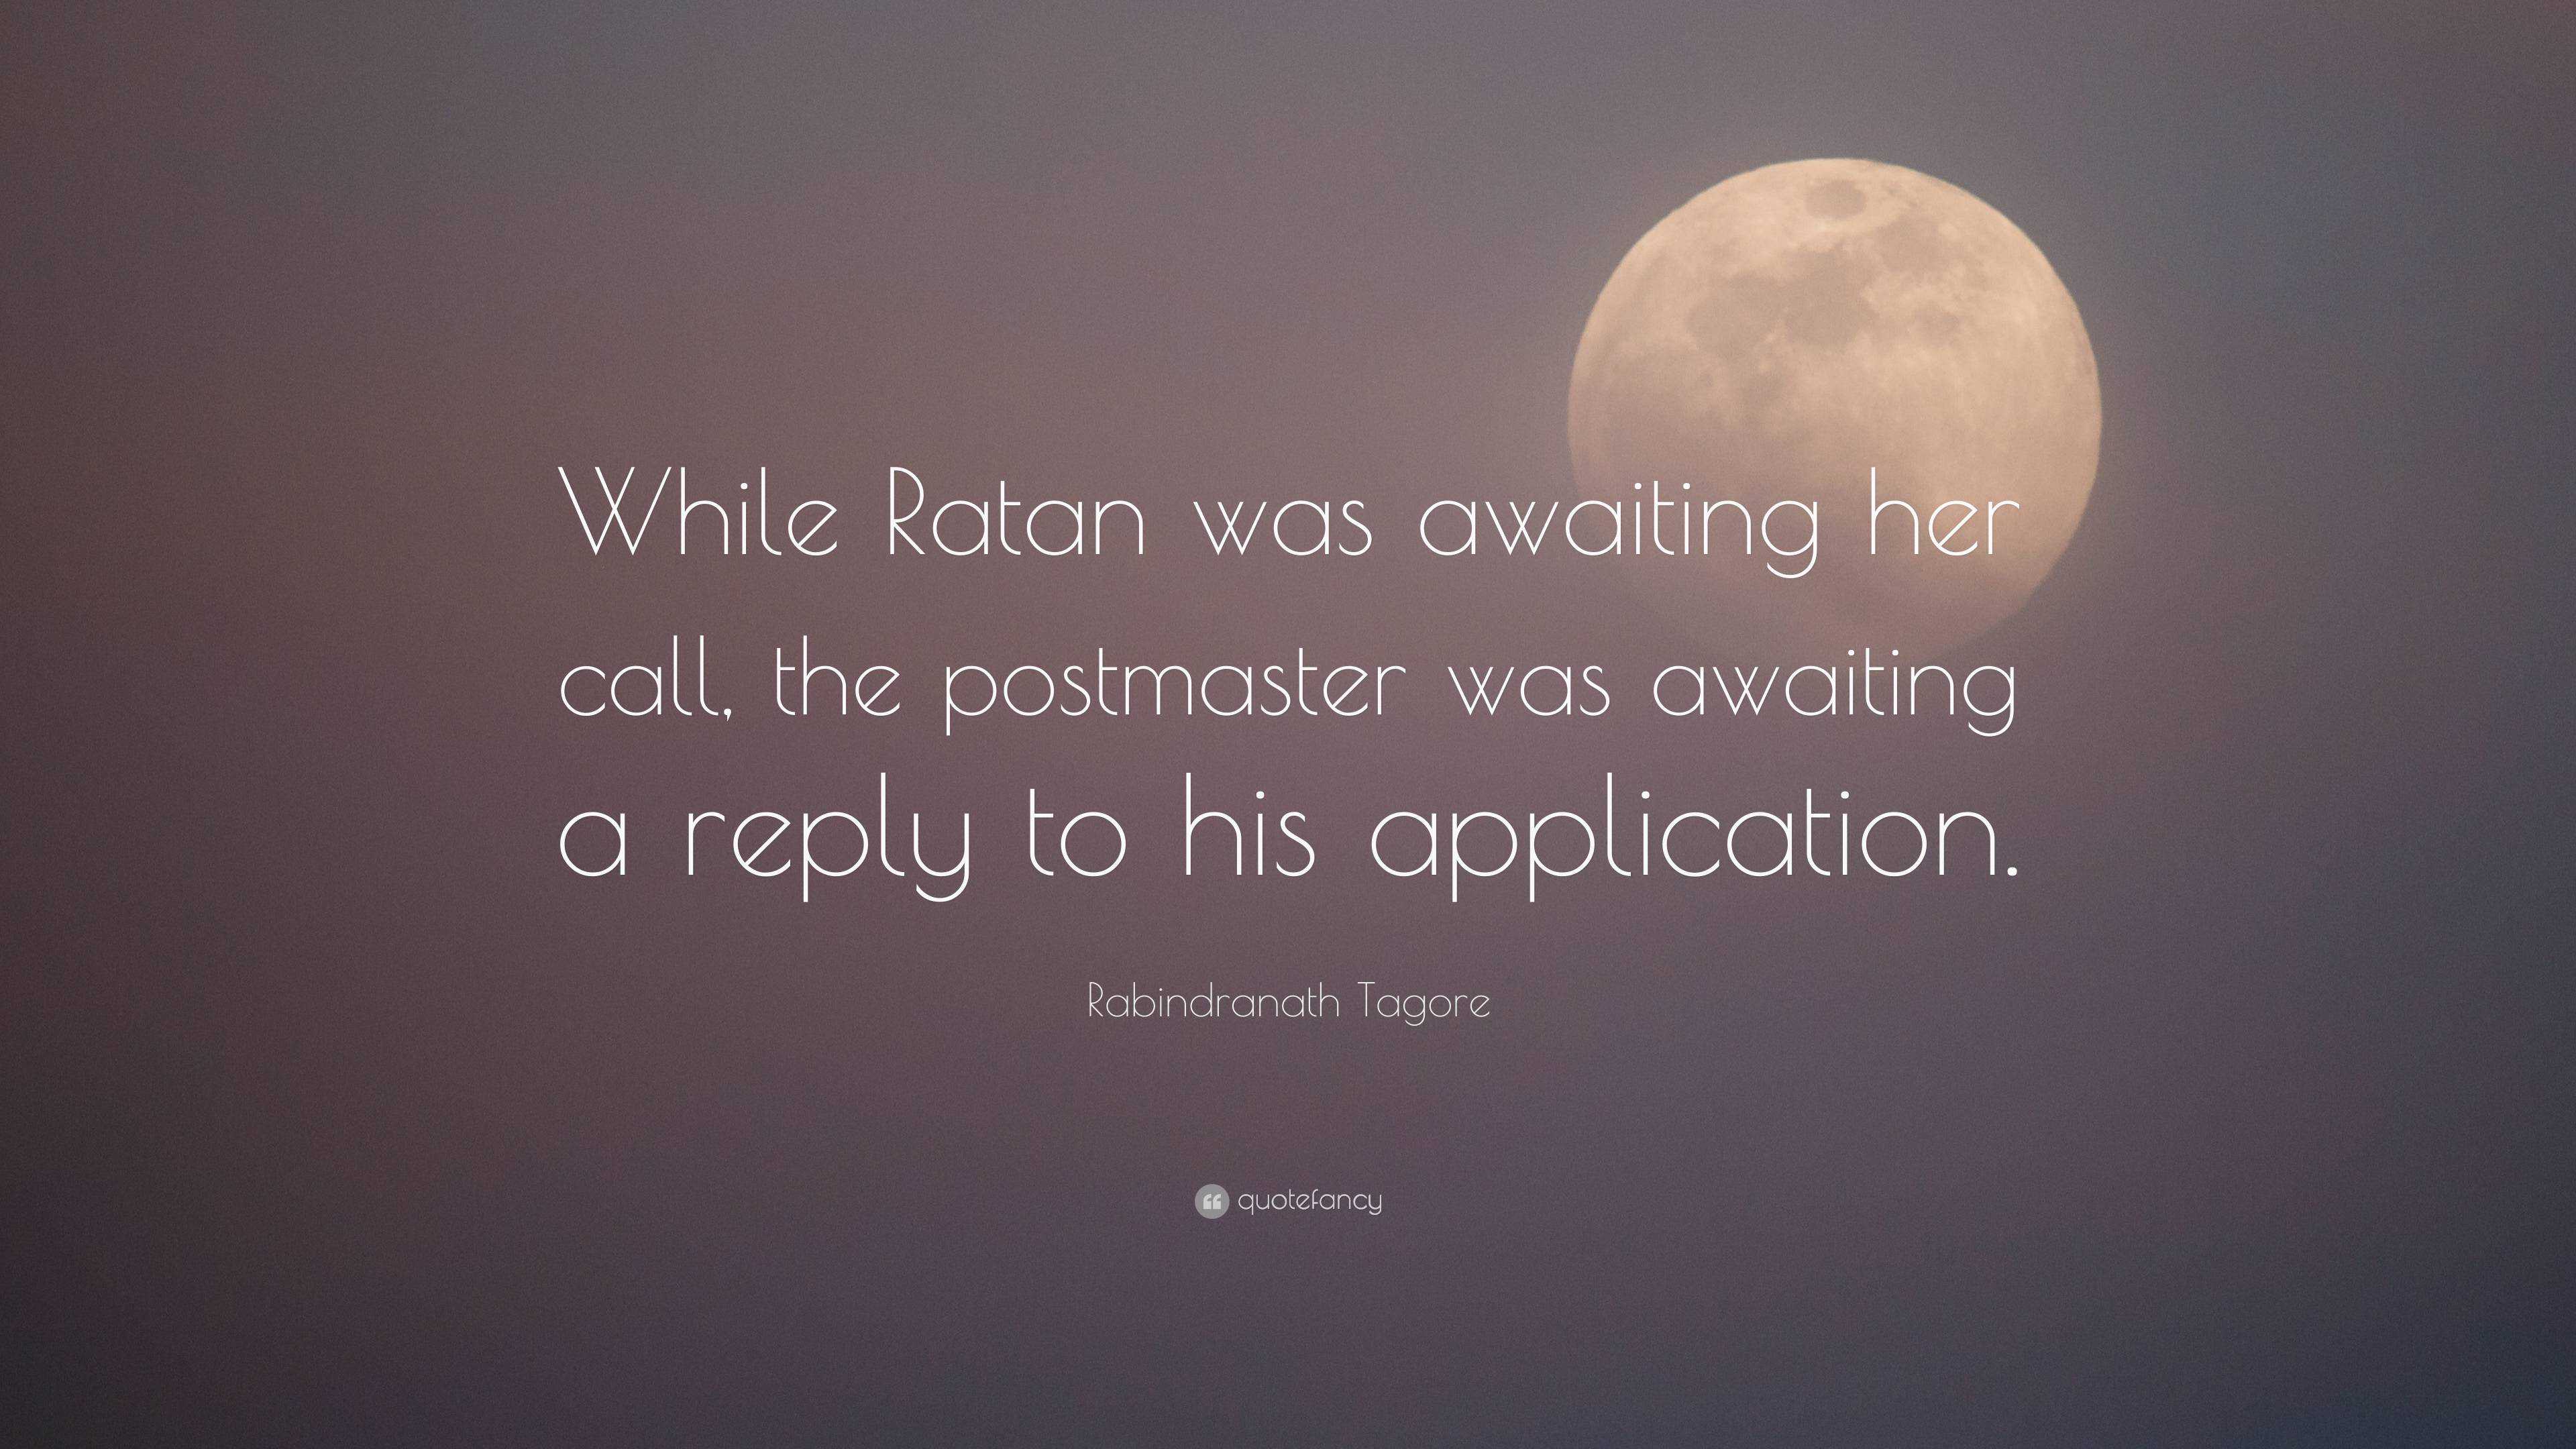 Rabindranath Tagore Quote: “While Ratan was awaiting her call, the ...